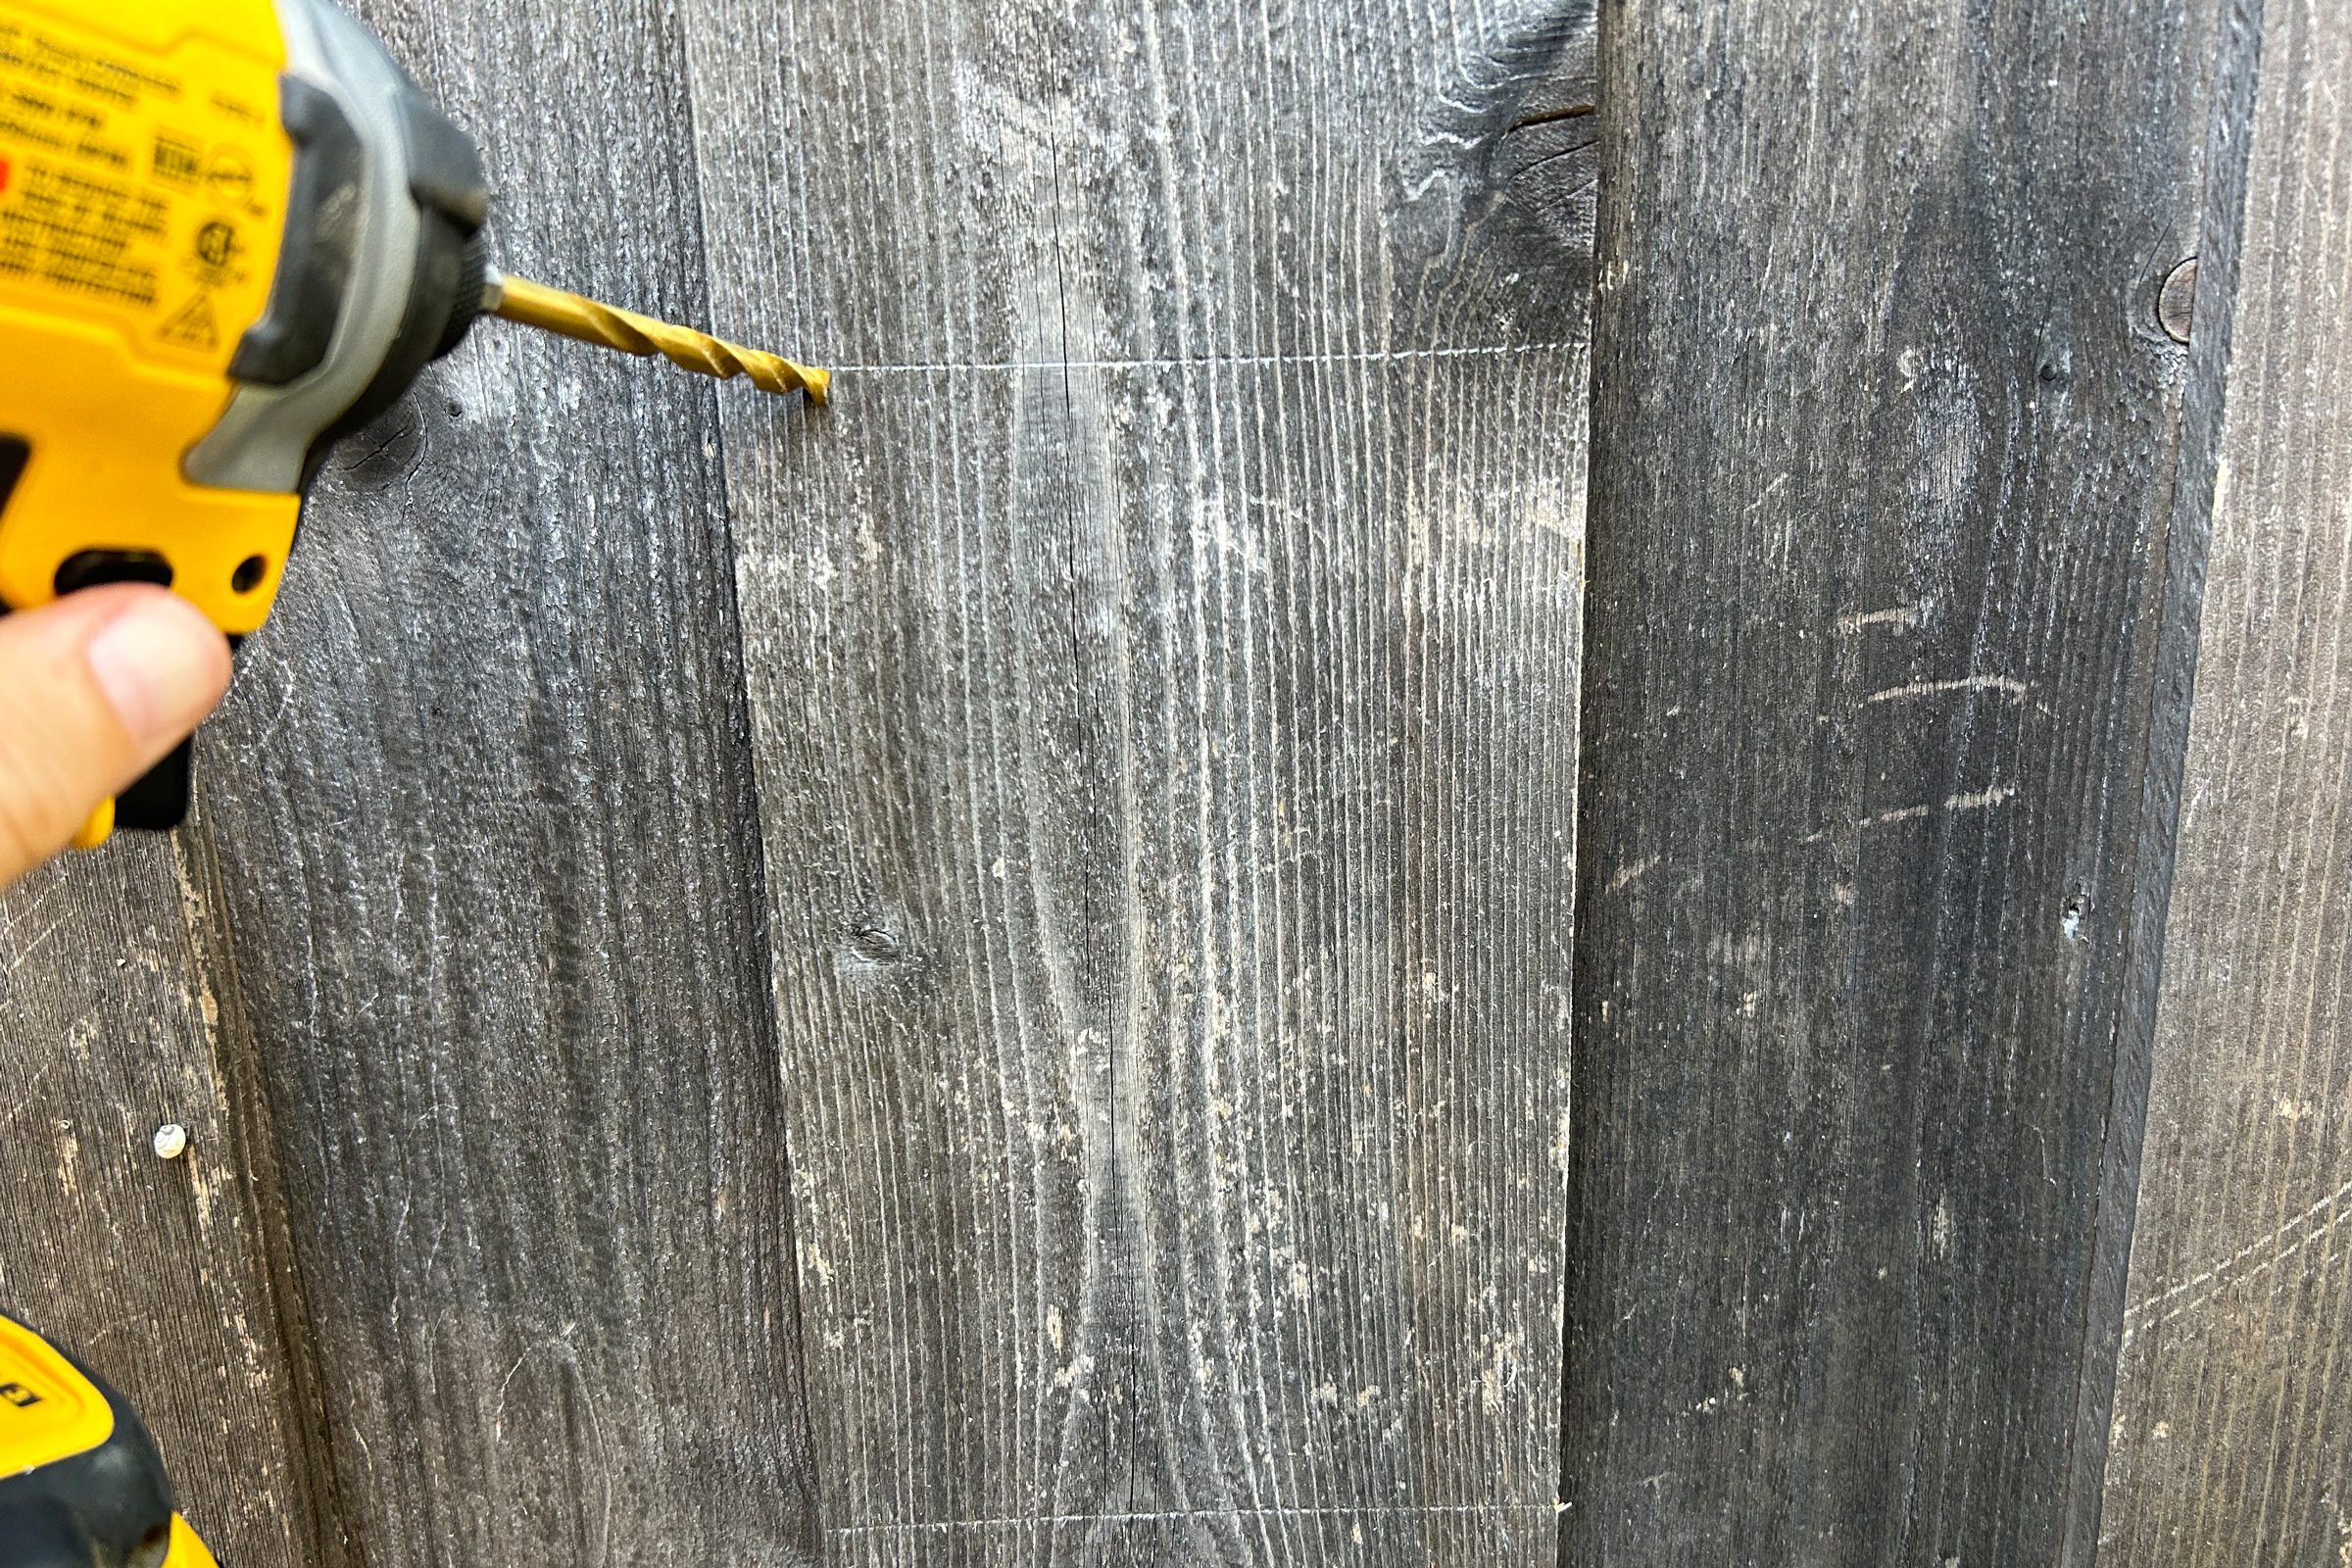 drilling a hole in the fence